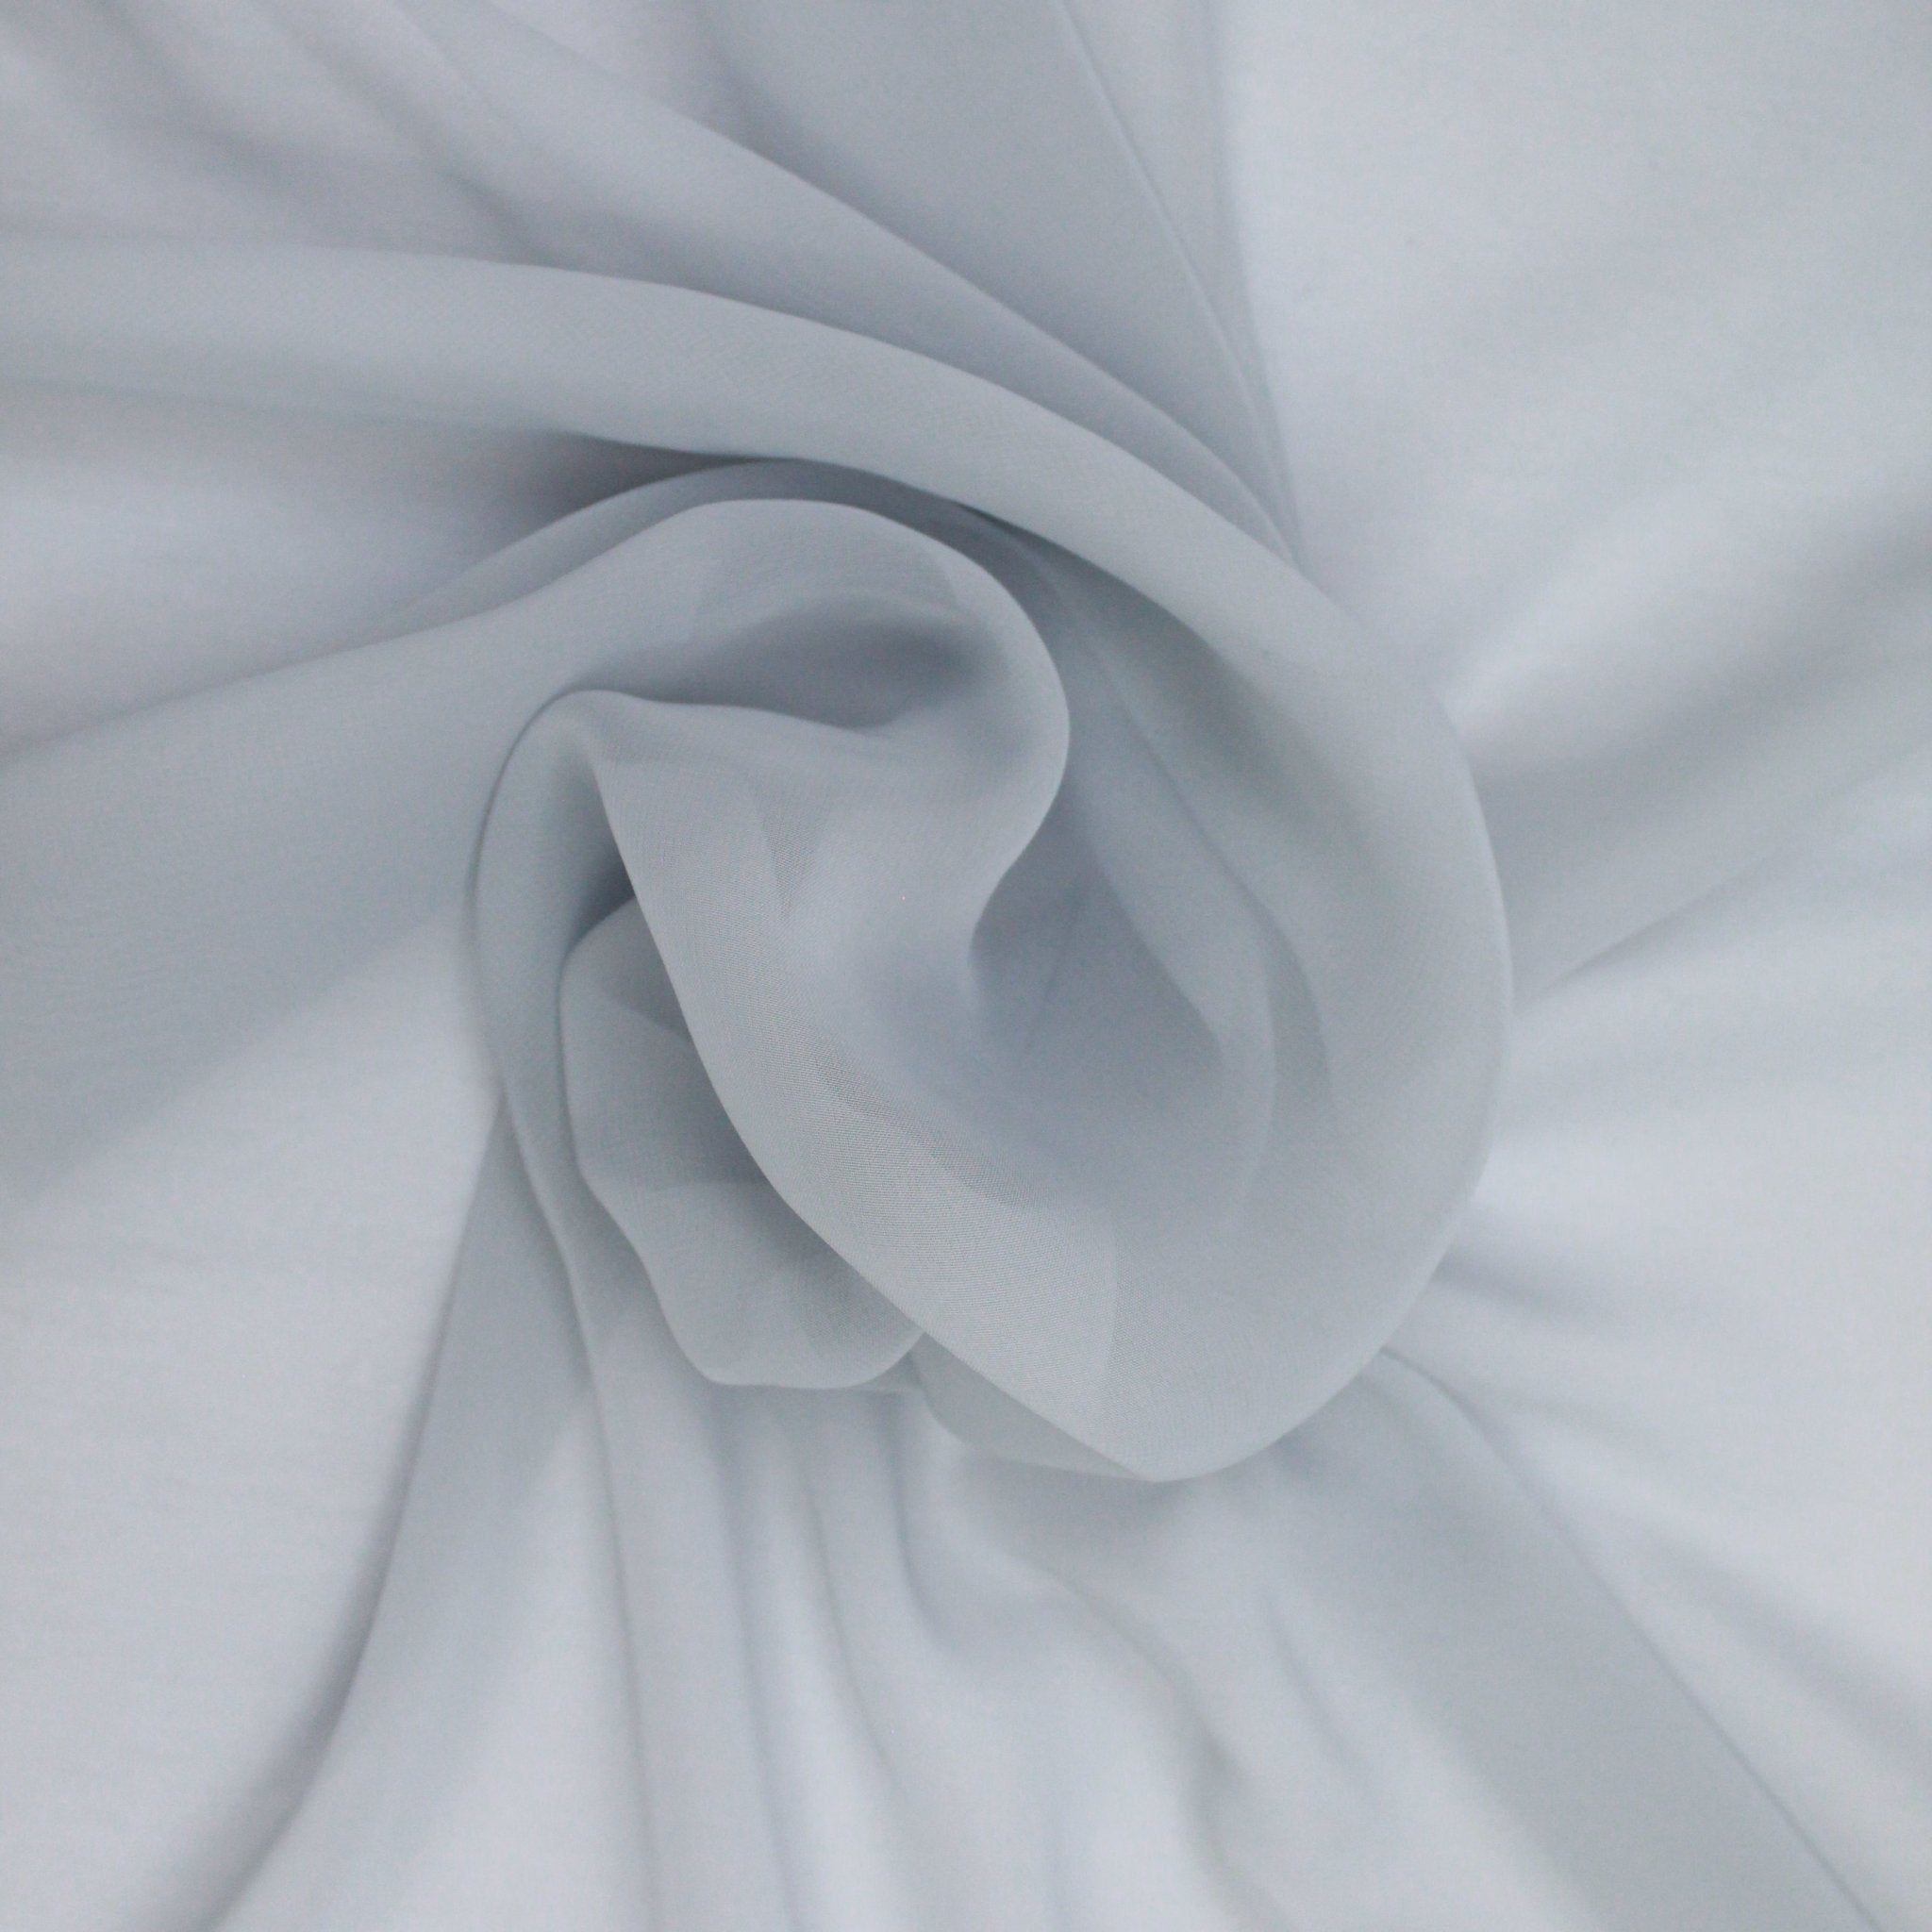 Premium Quality Smooth Chiffon Fabric - 60" Wide - Variations Available - Pound A Metre